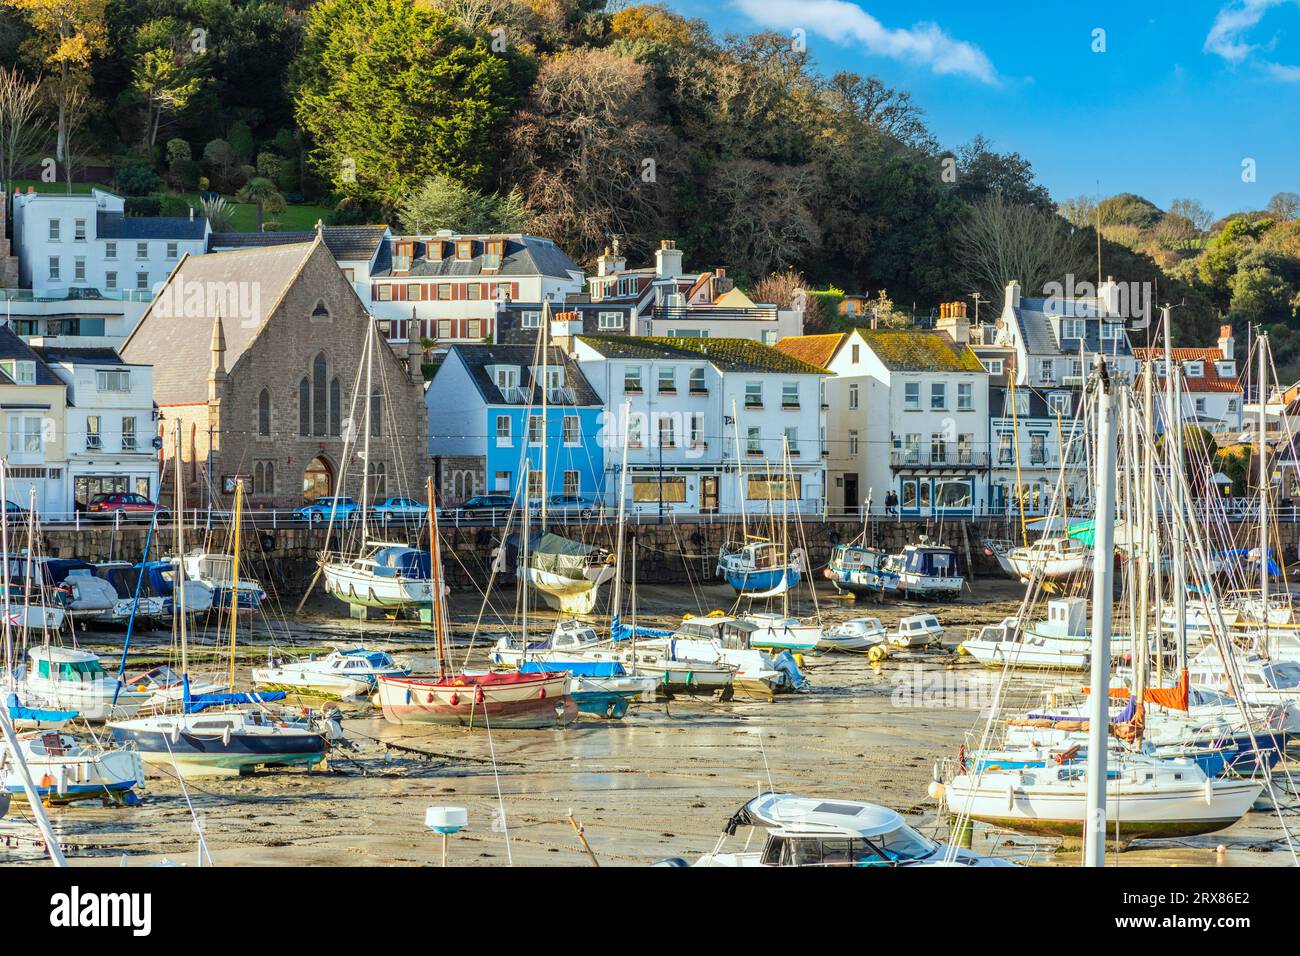 Saint Aubin town seashore view with Sacred heart of Jesus church,, and lots of yachts, bailiwick of Jersey, Channel Islands, Great Britain Stock Photo